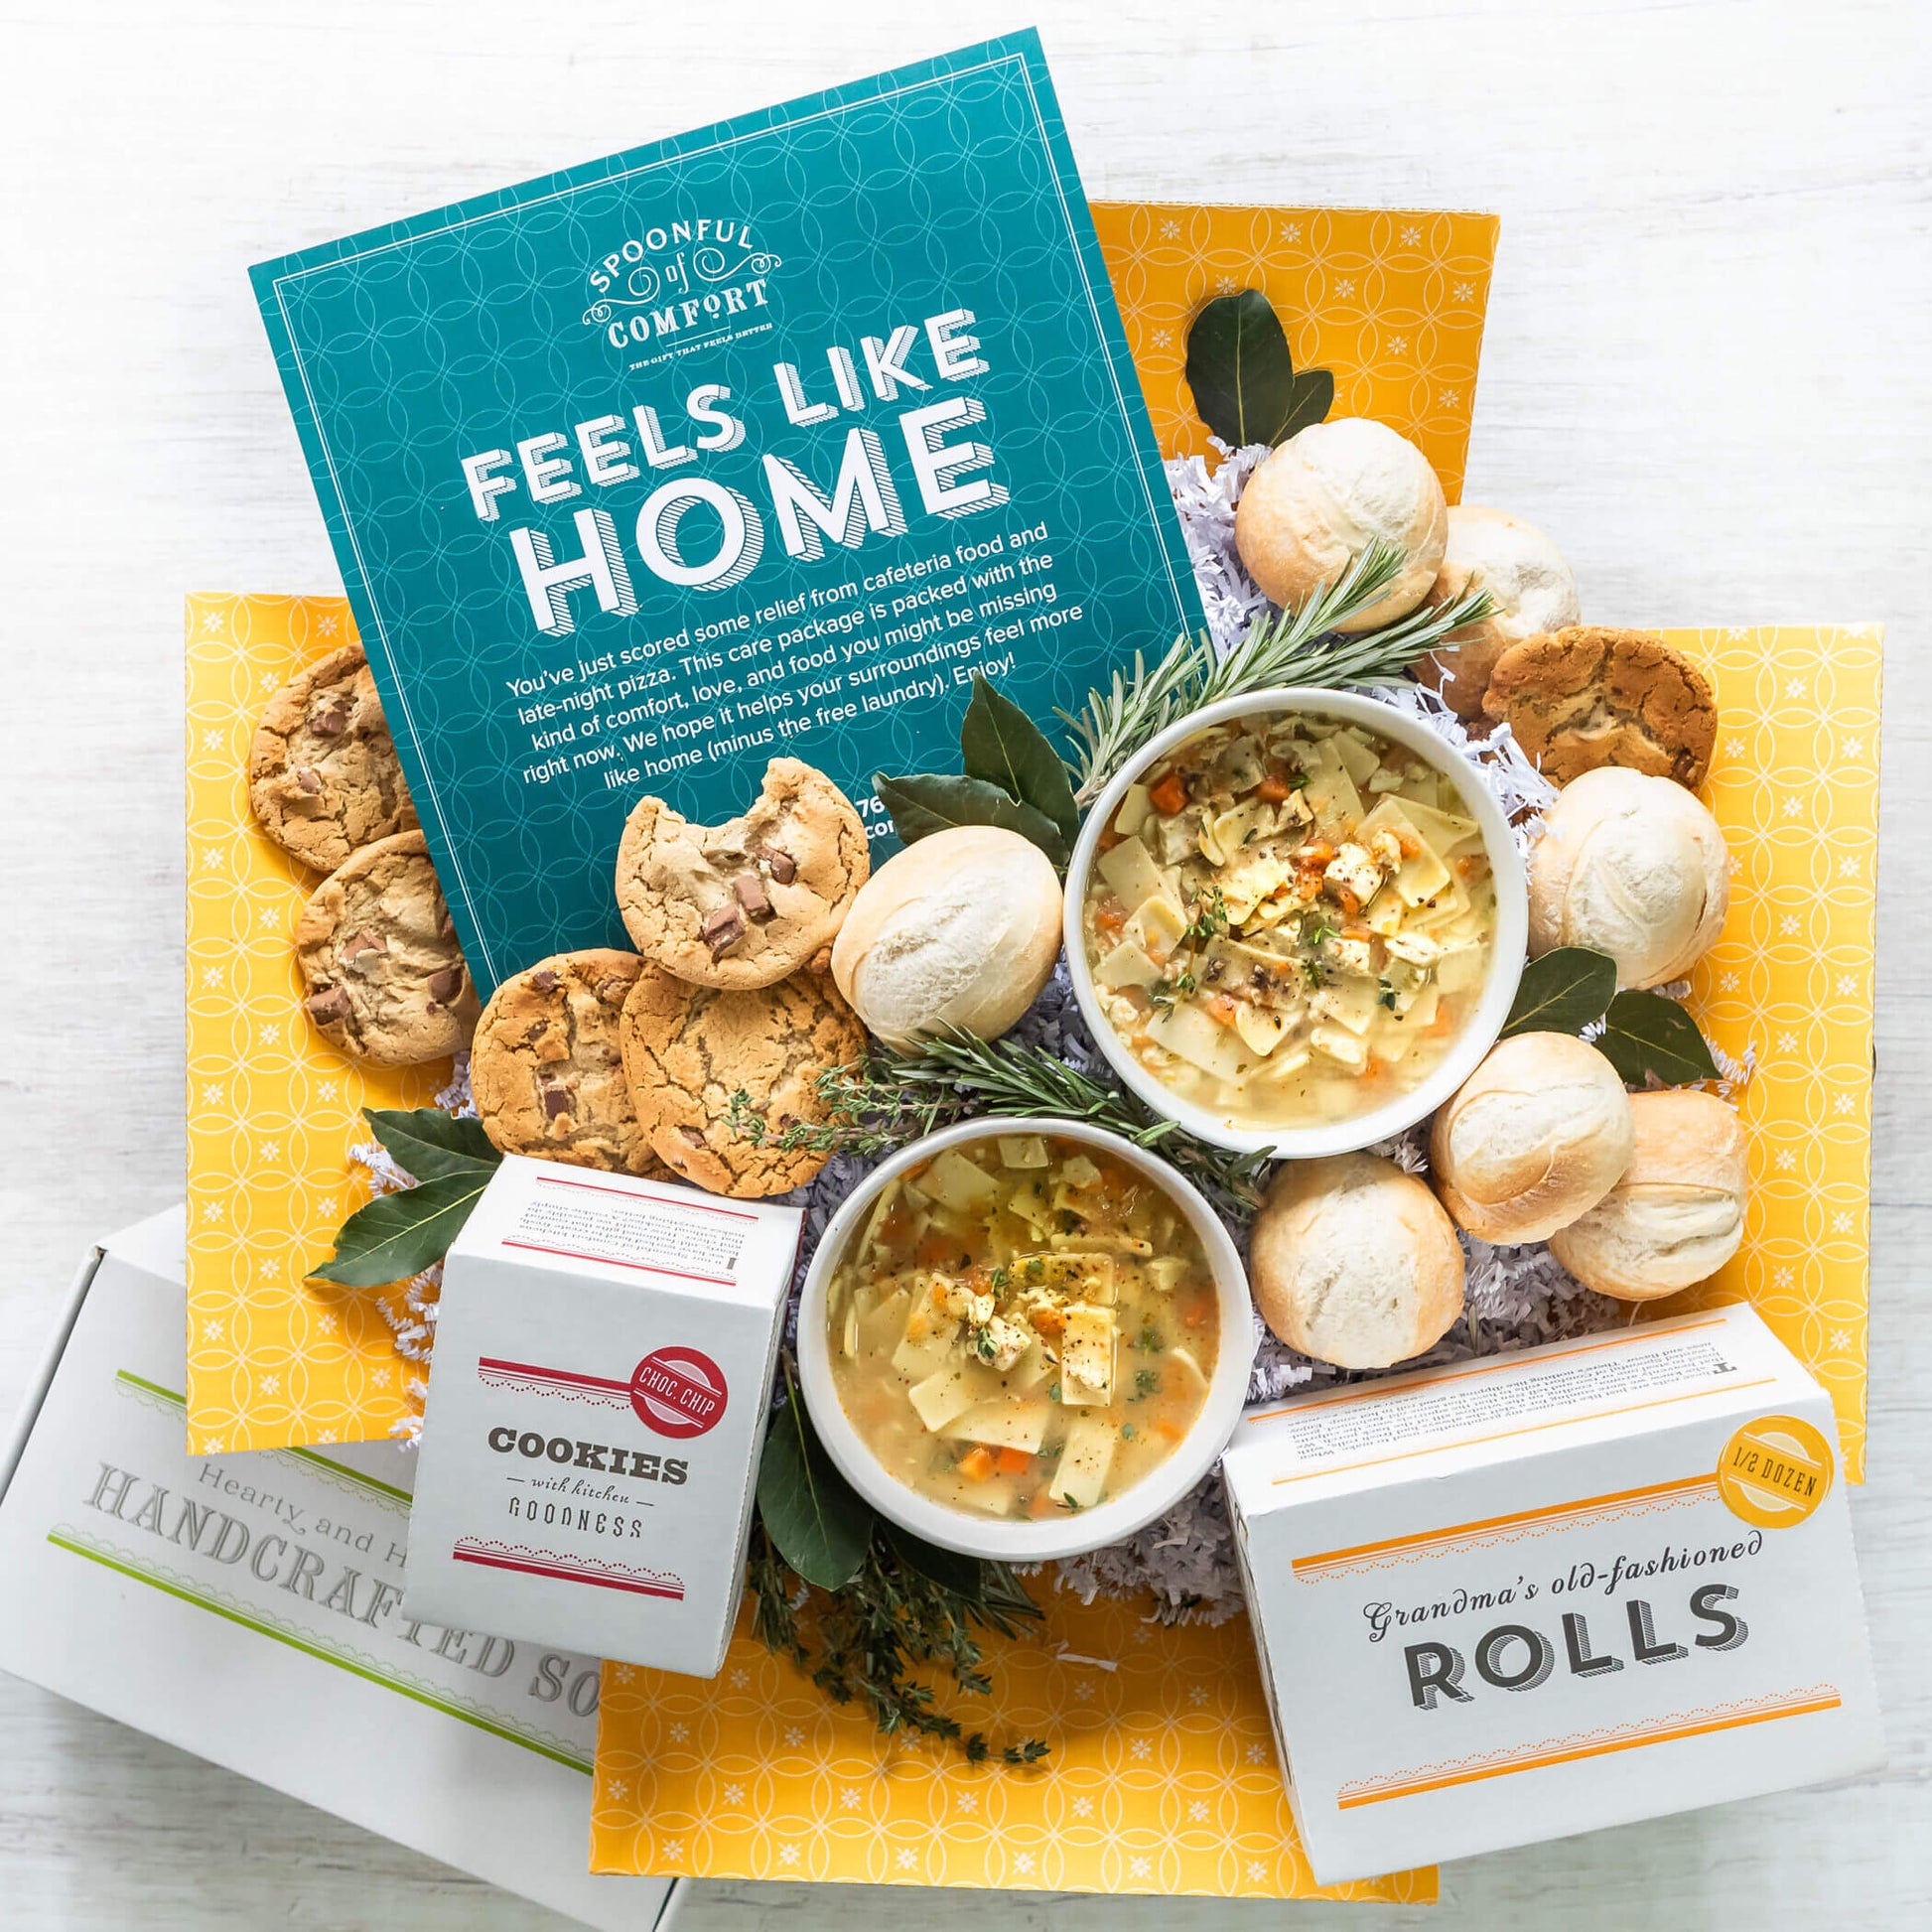 College Care Package shows two bowls of chicken noodle soup surrounded by cookies and rolls. Includes insert that reads: Feels Like Home